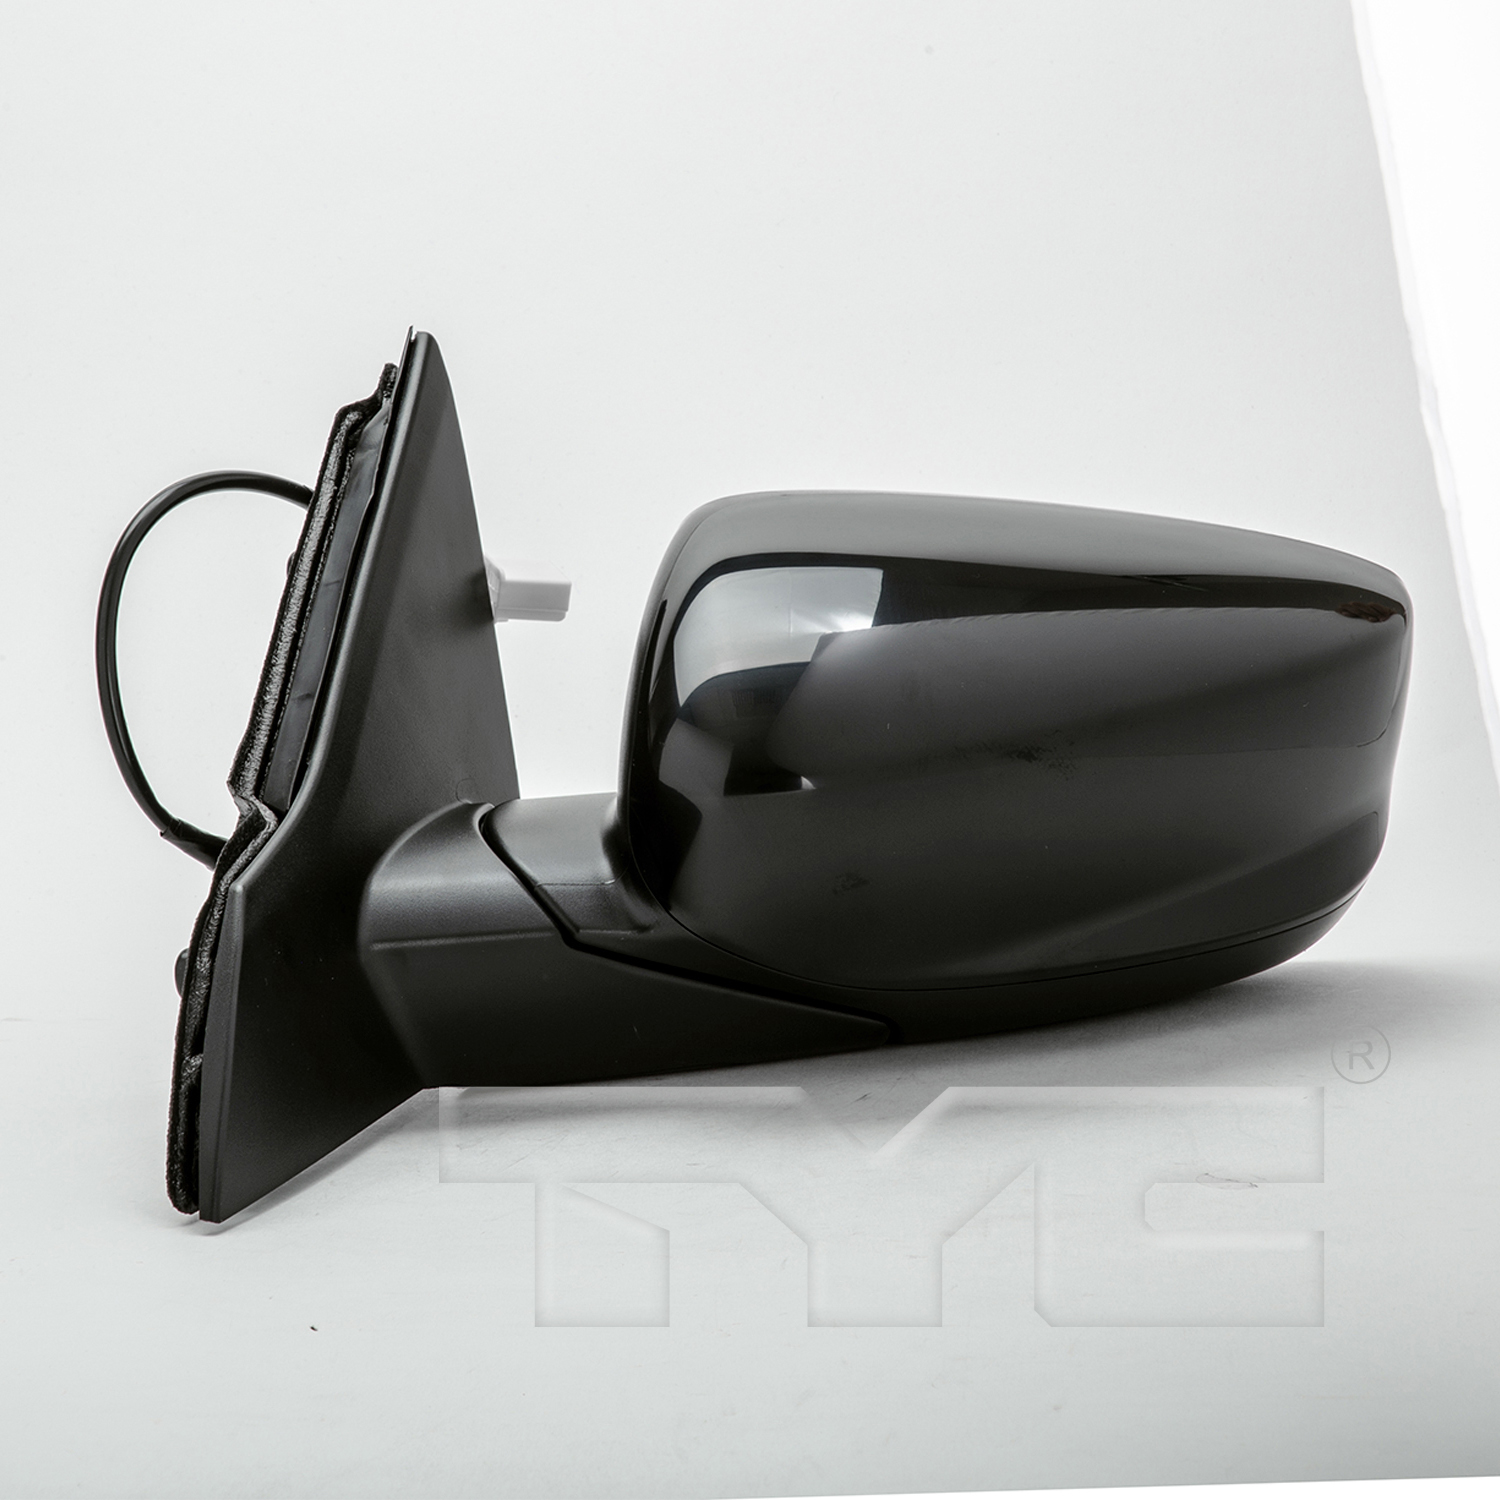 Aftermarket MIRRORS for HONDA - ACCORD, ACCORD,13-13,LT Mirror outside rear view